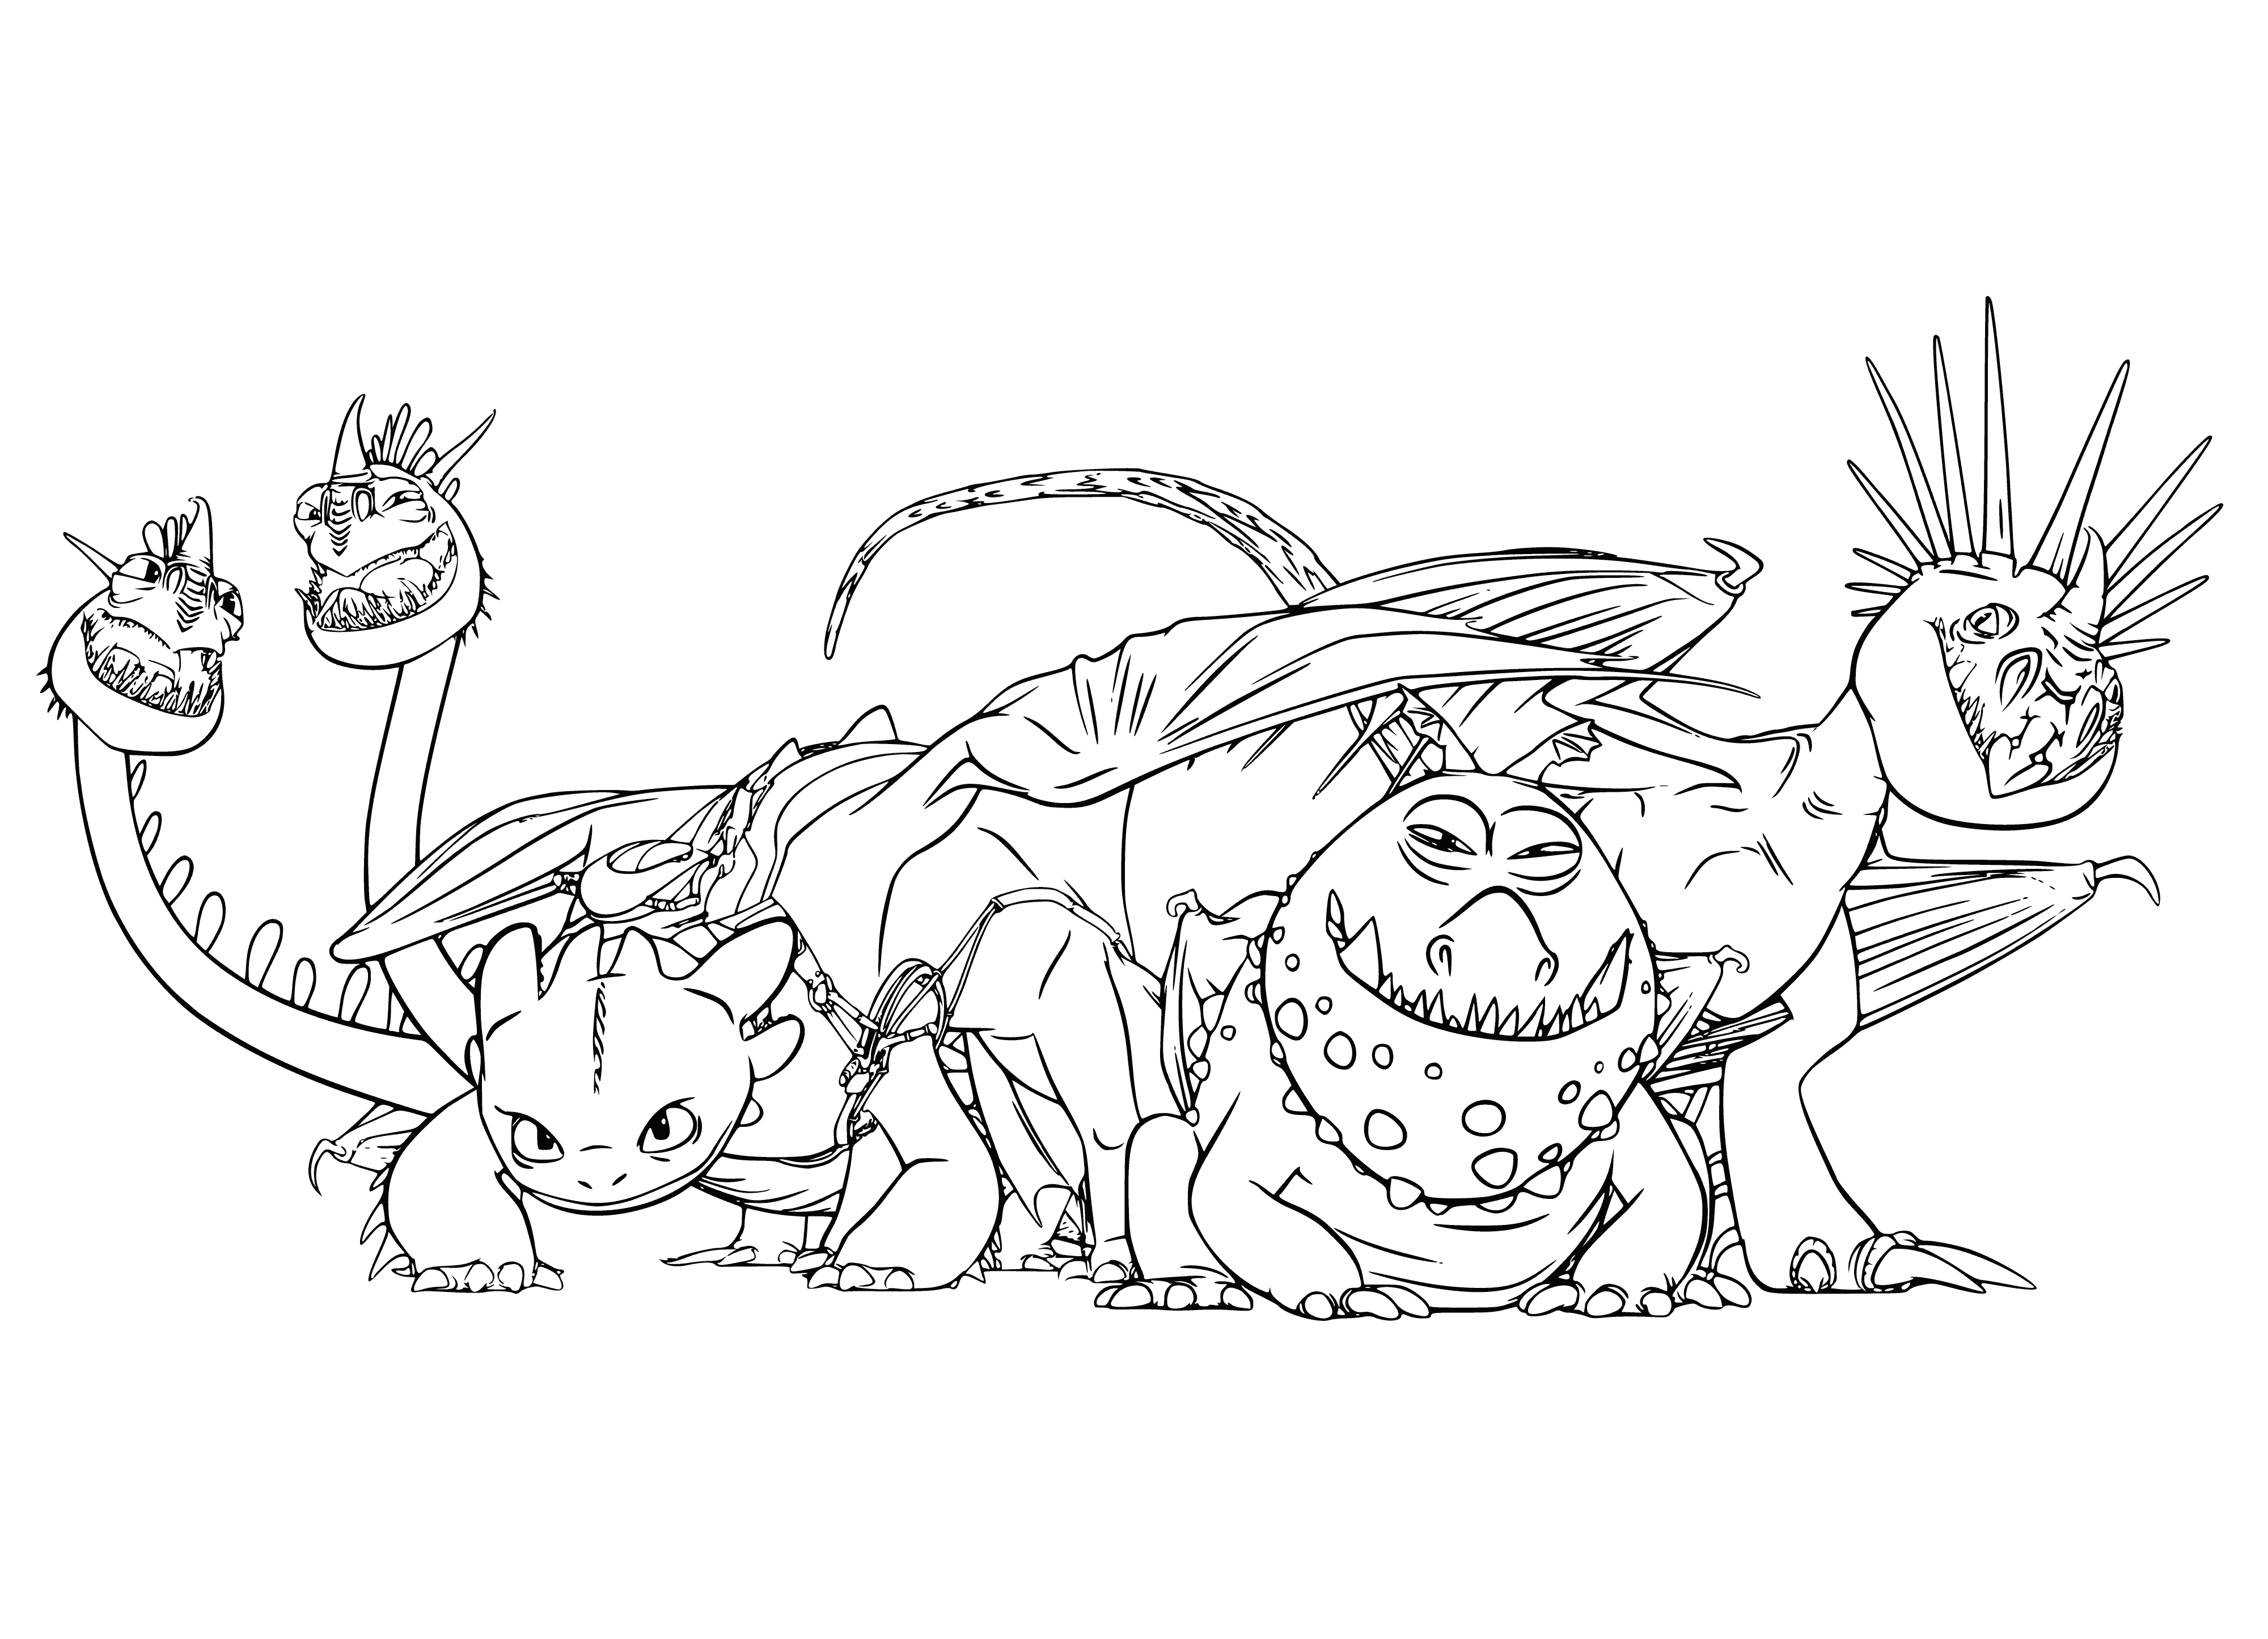 coloring page: Coloring page of a Night Fury plus small coloring pages of creatures like a Grommel & Thunder Guild, promoting versatile fasteners.